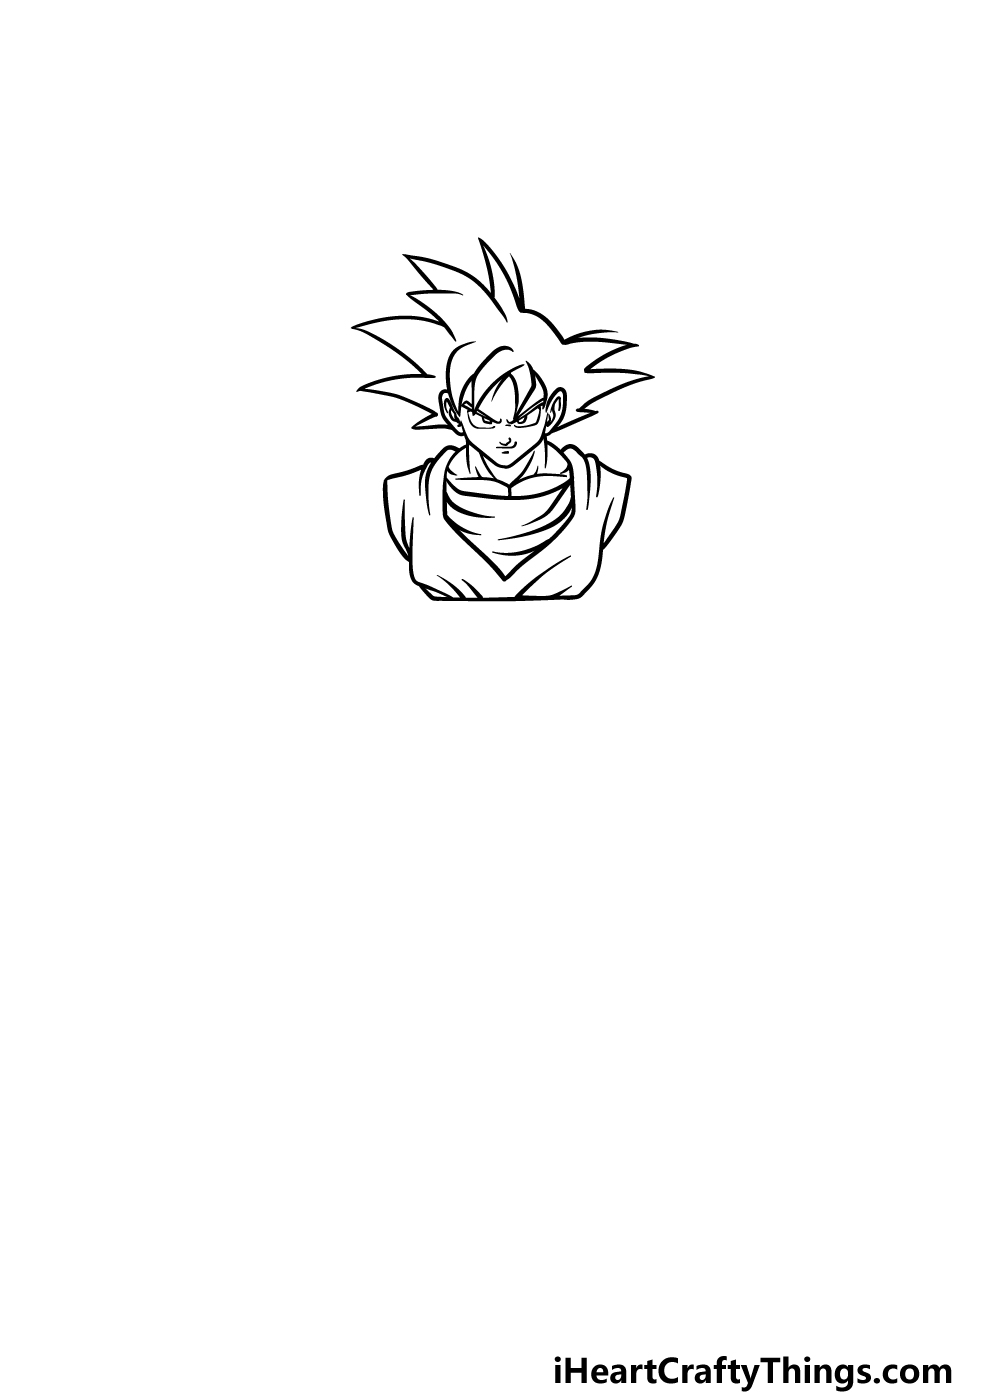 Discover 122+ goku all forms drawing super hot